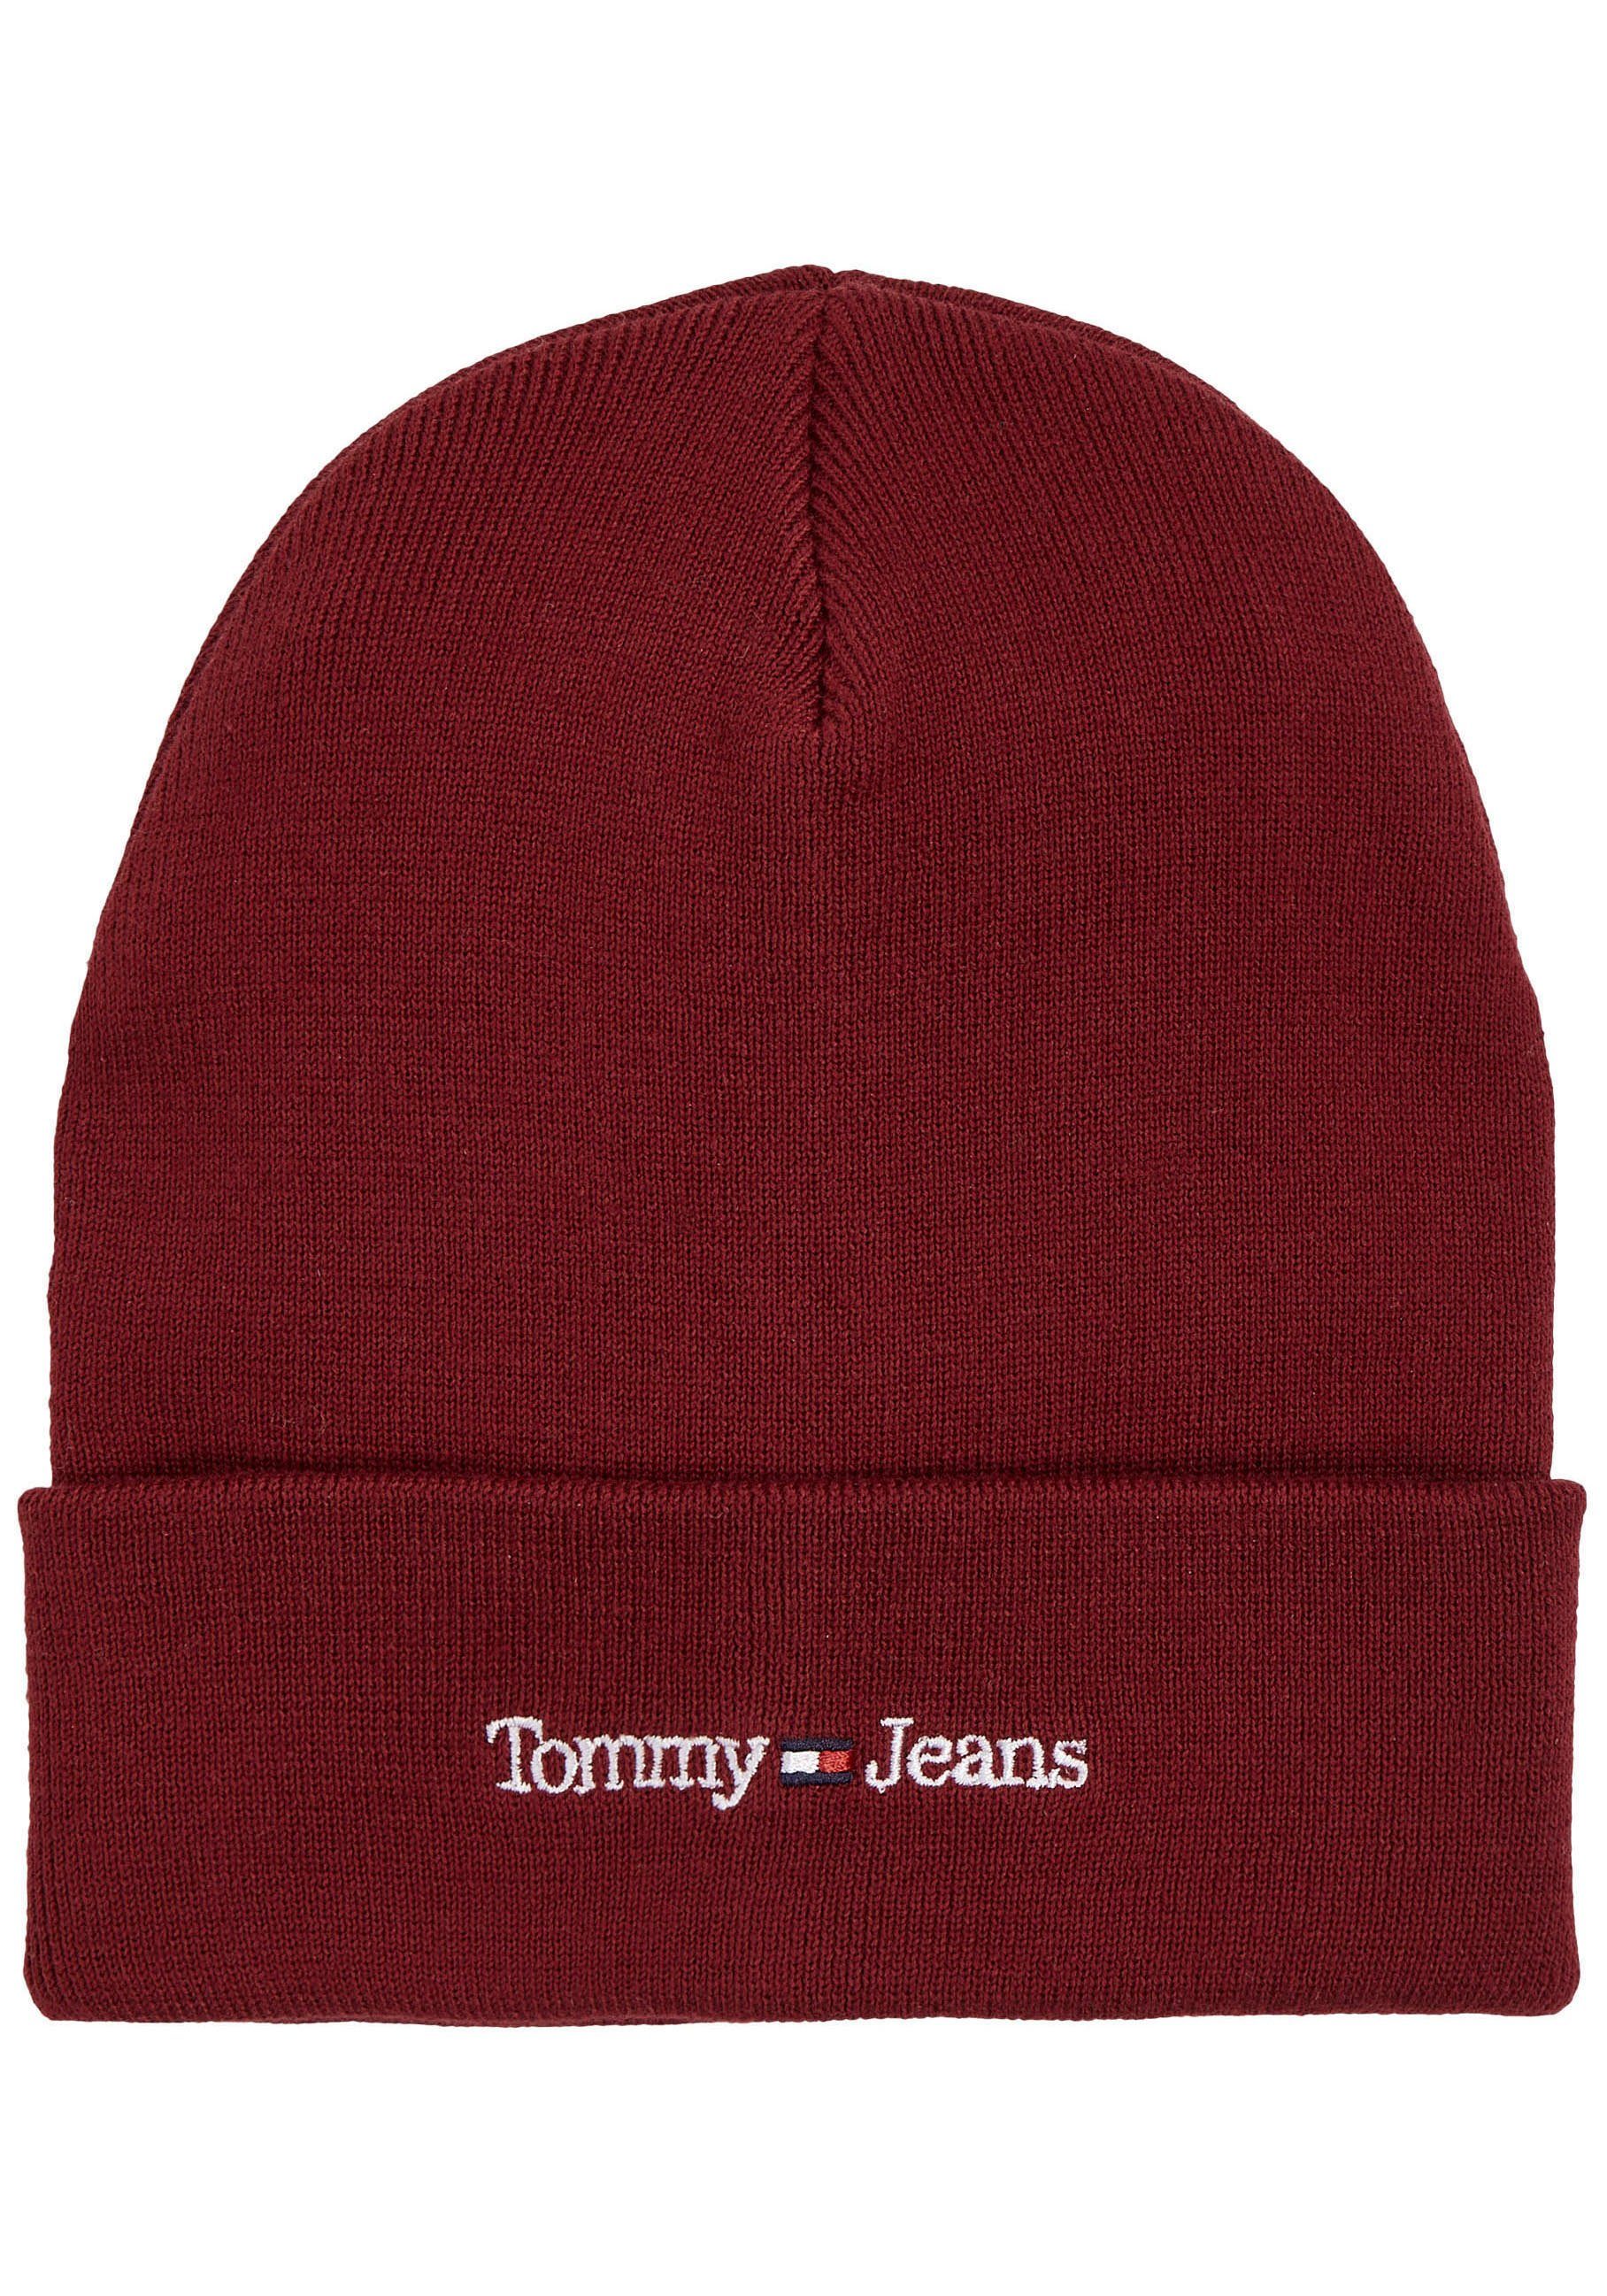 BEANIE SPORT Jeans Beanie Rouge Tommy TJM